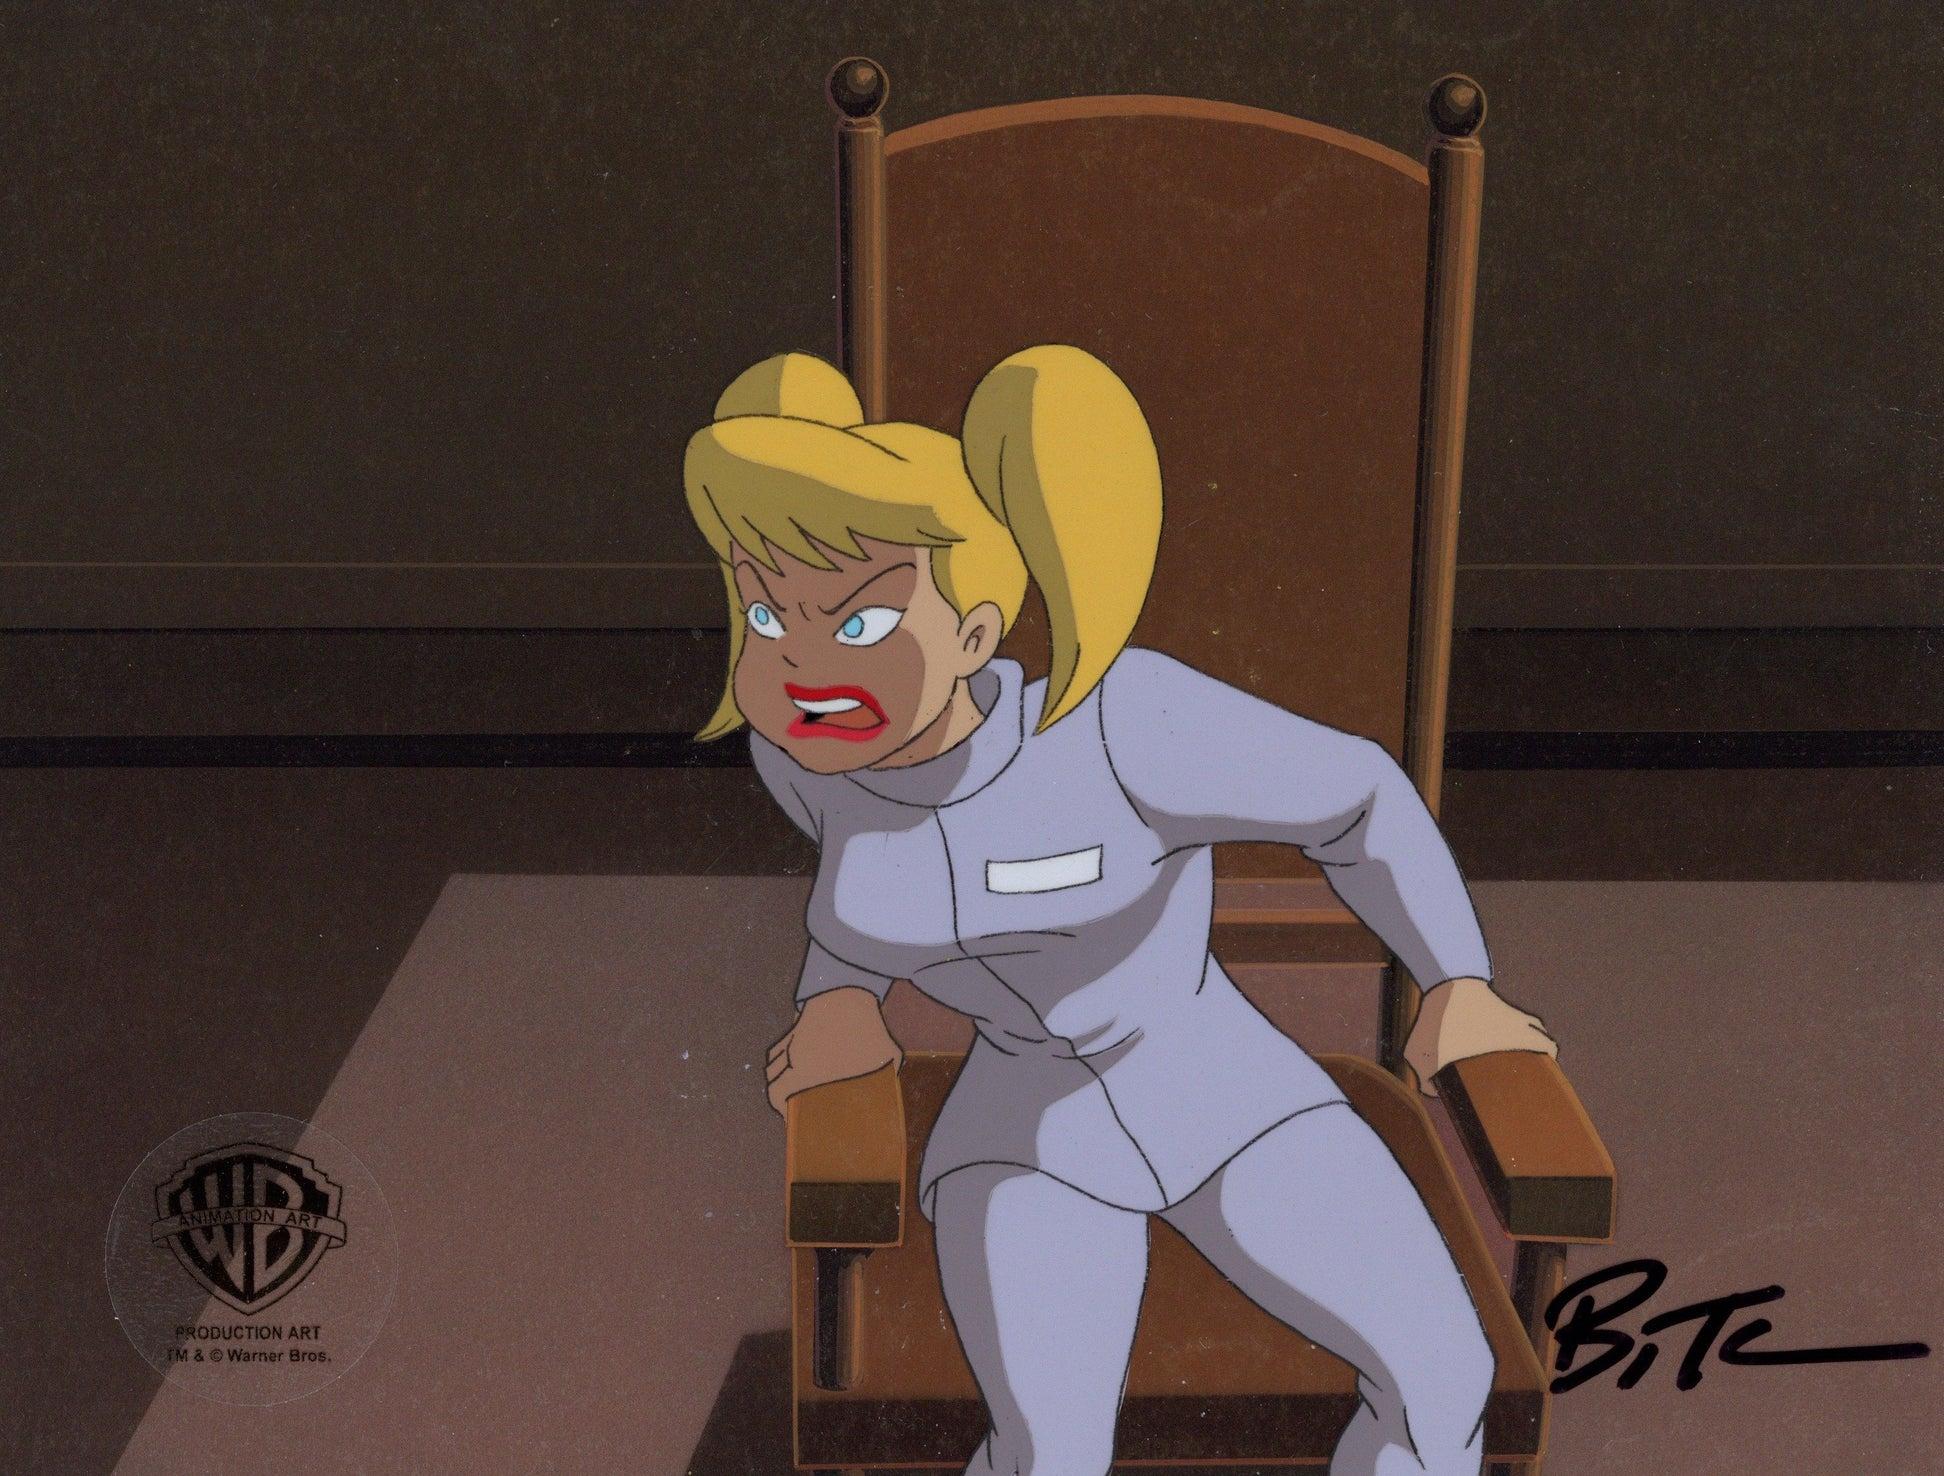 Batman Animated Series Original Cel and Background signed by Bruce Timm: Harleen - Art by DC Comics Studio Artists